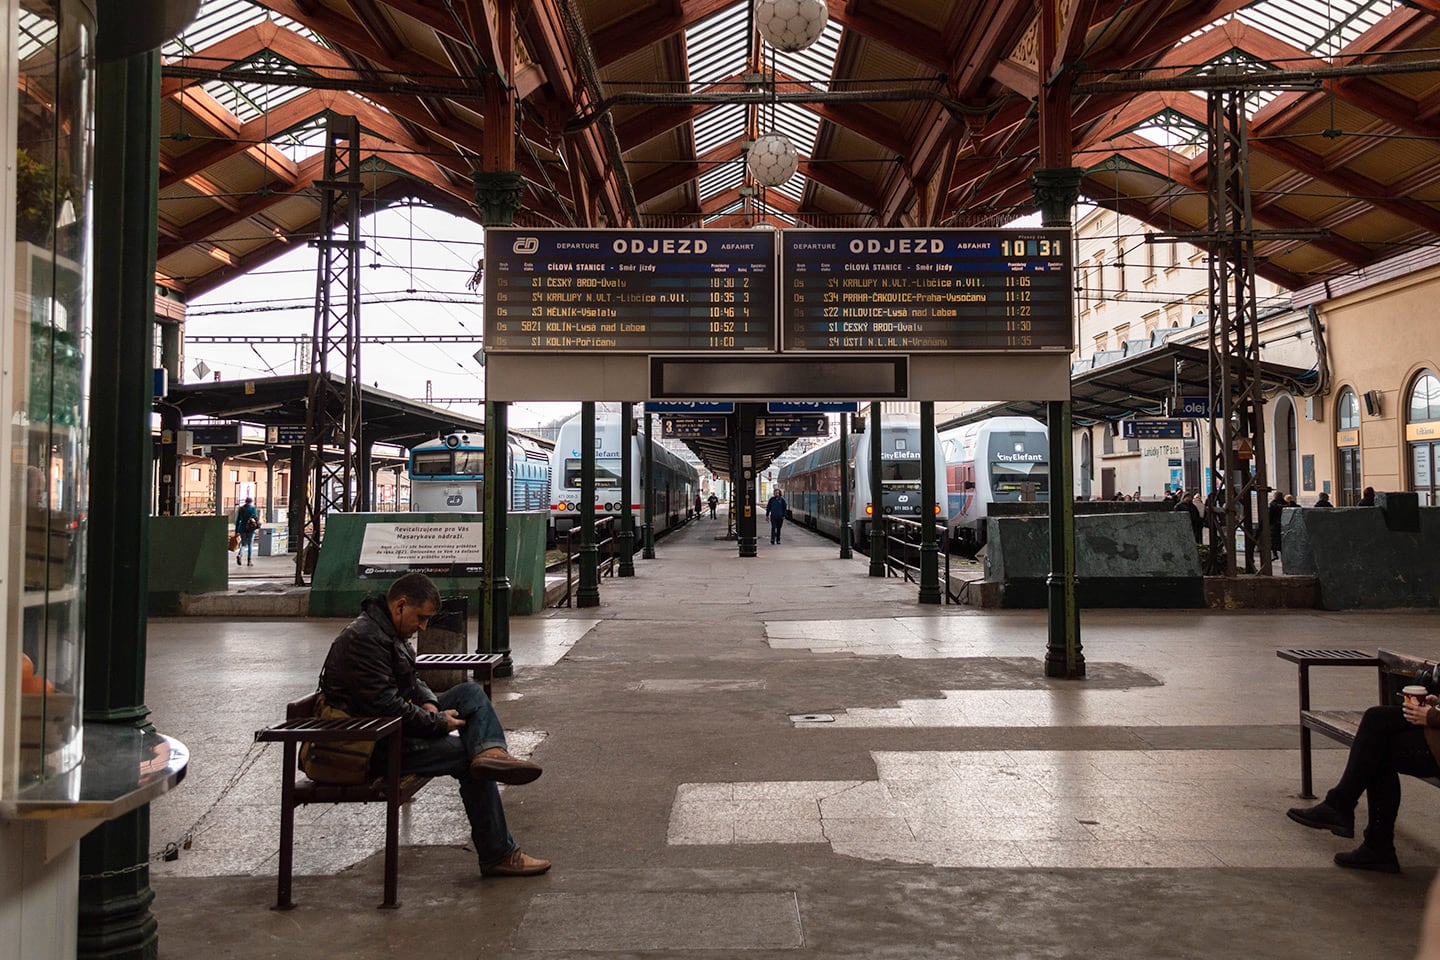 In Prague station a man sits reading his phone